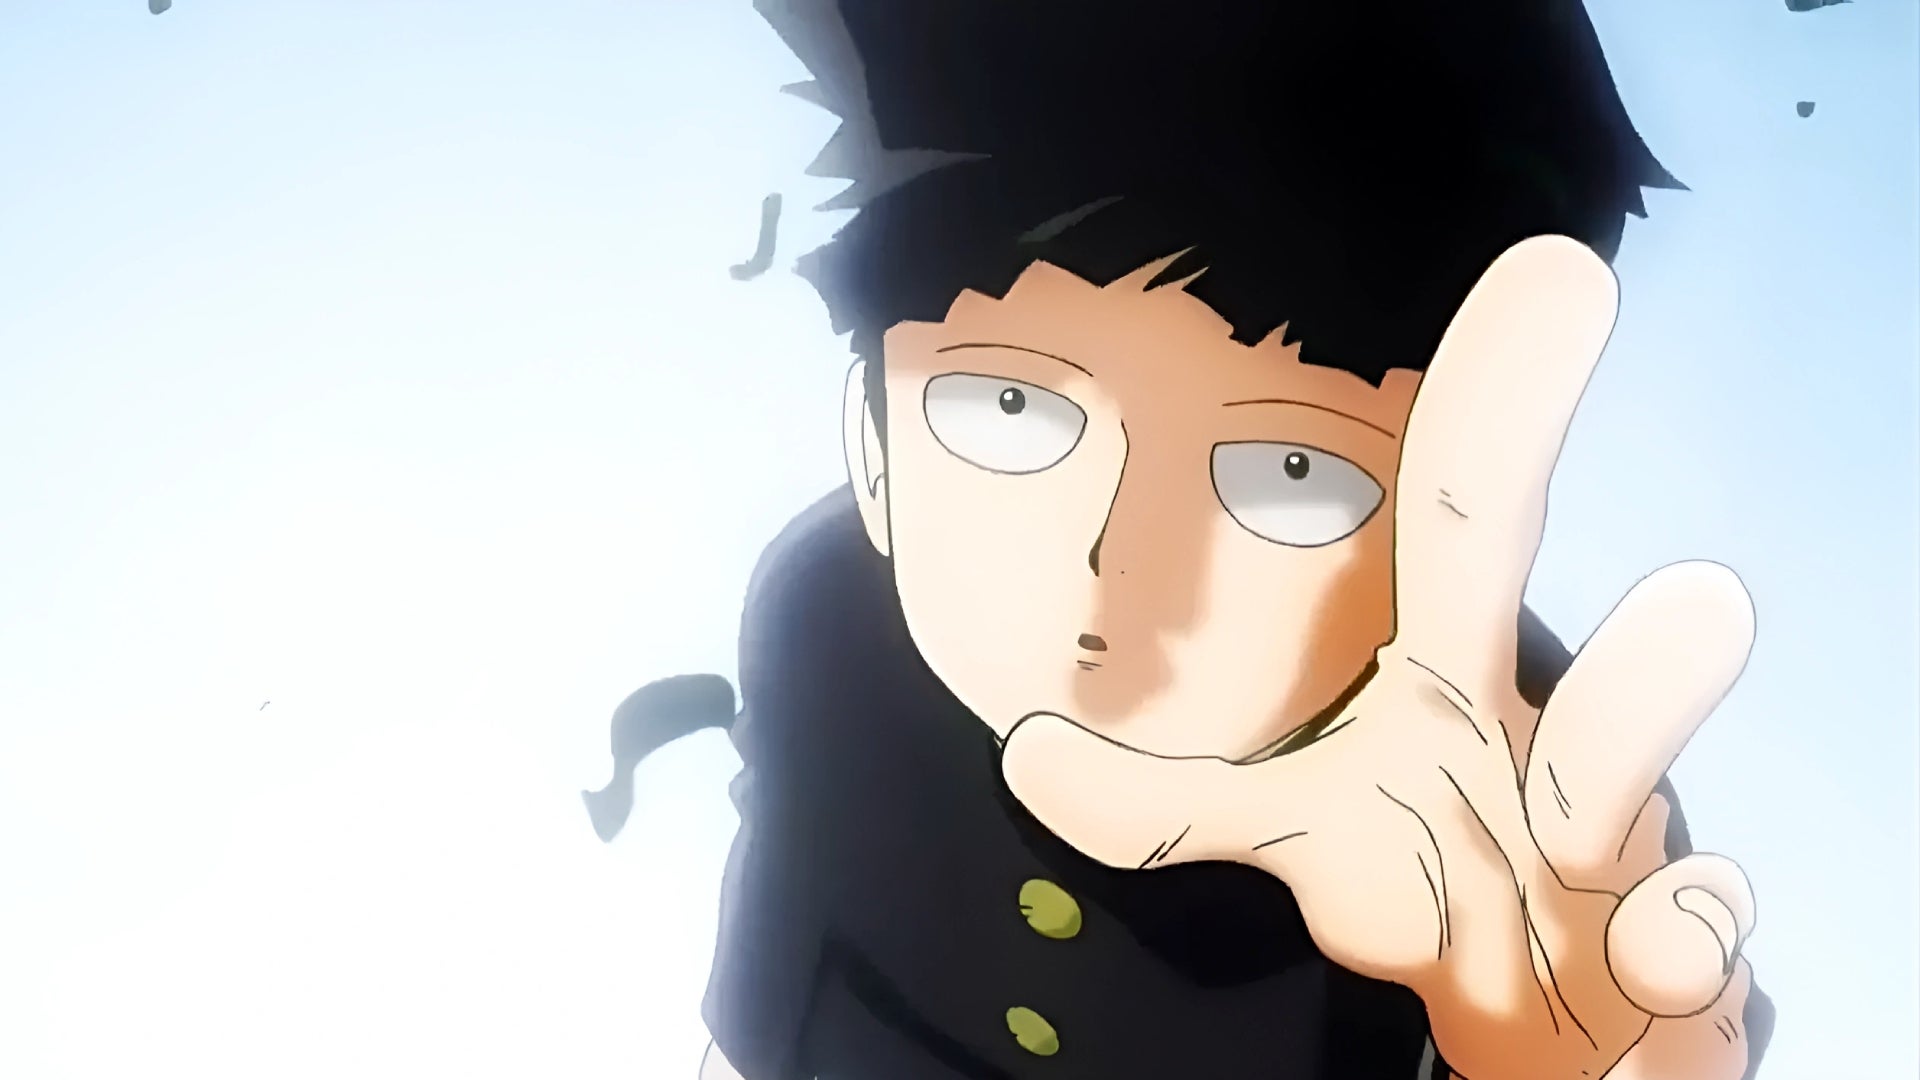 Mob Psycho 100 Season 3: Confirmed? Plot Details and Release Date